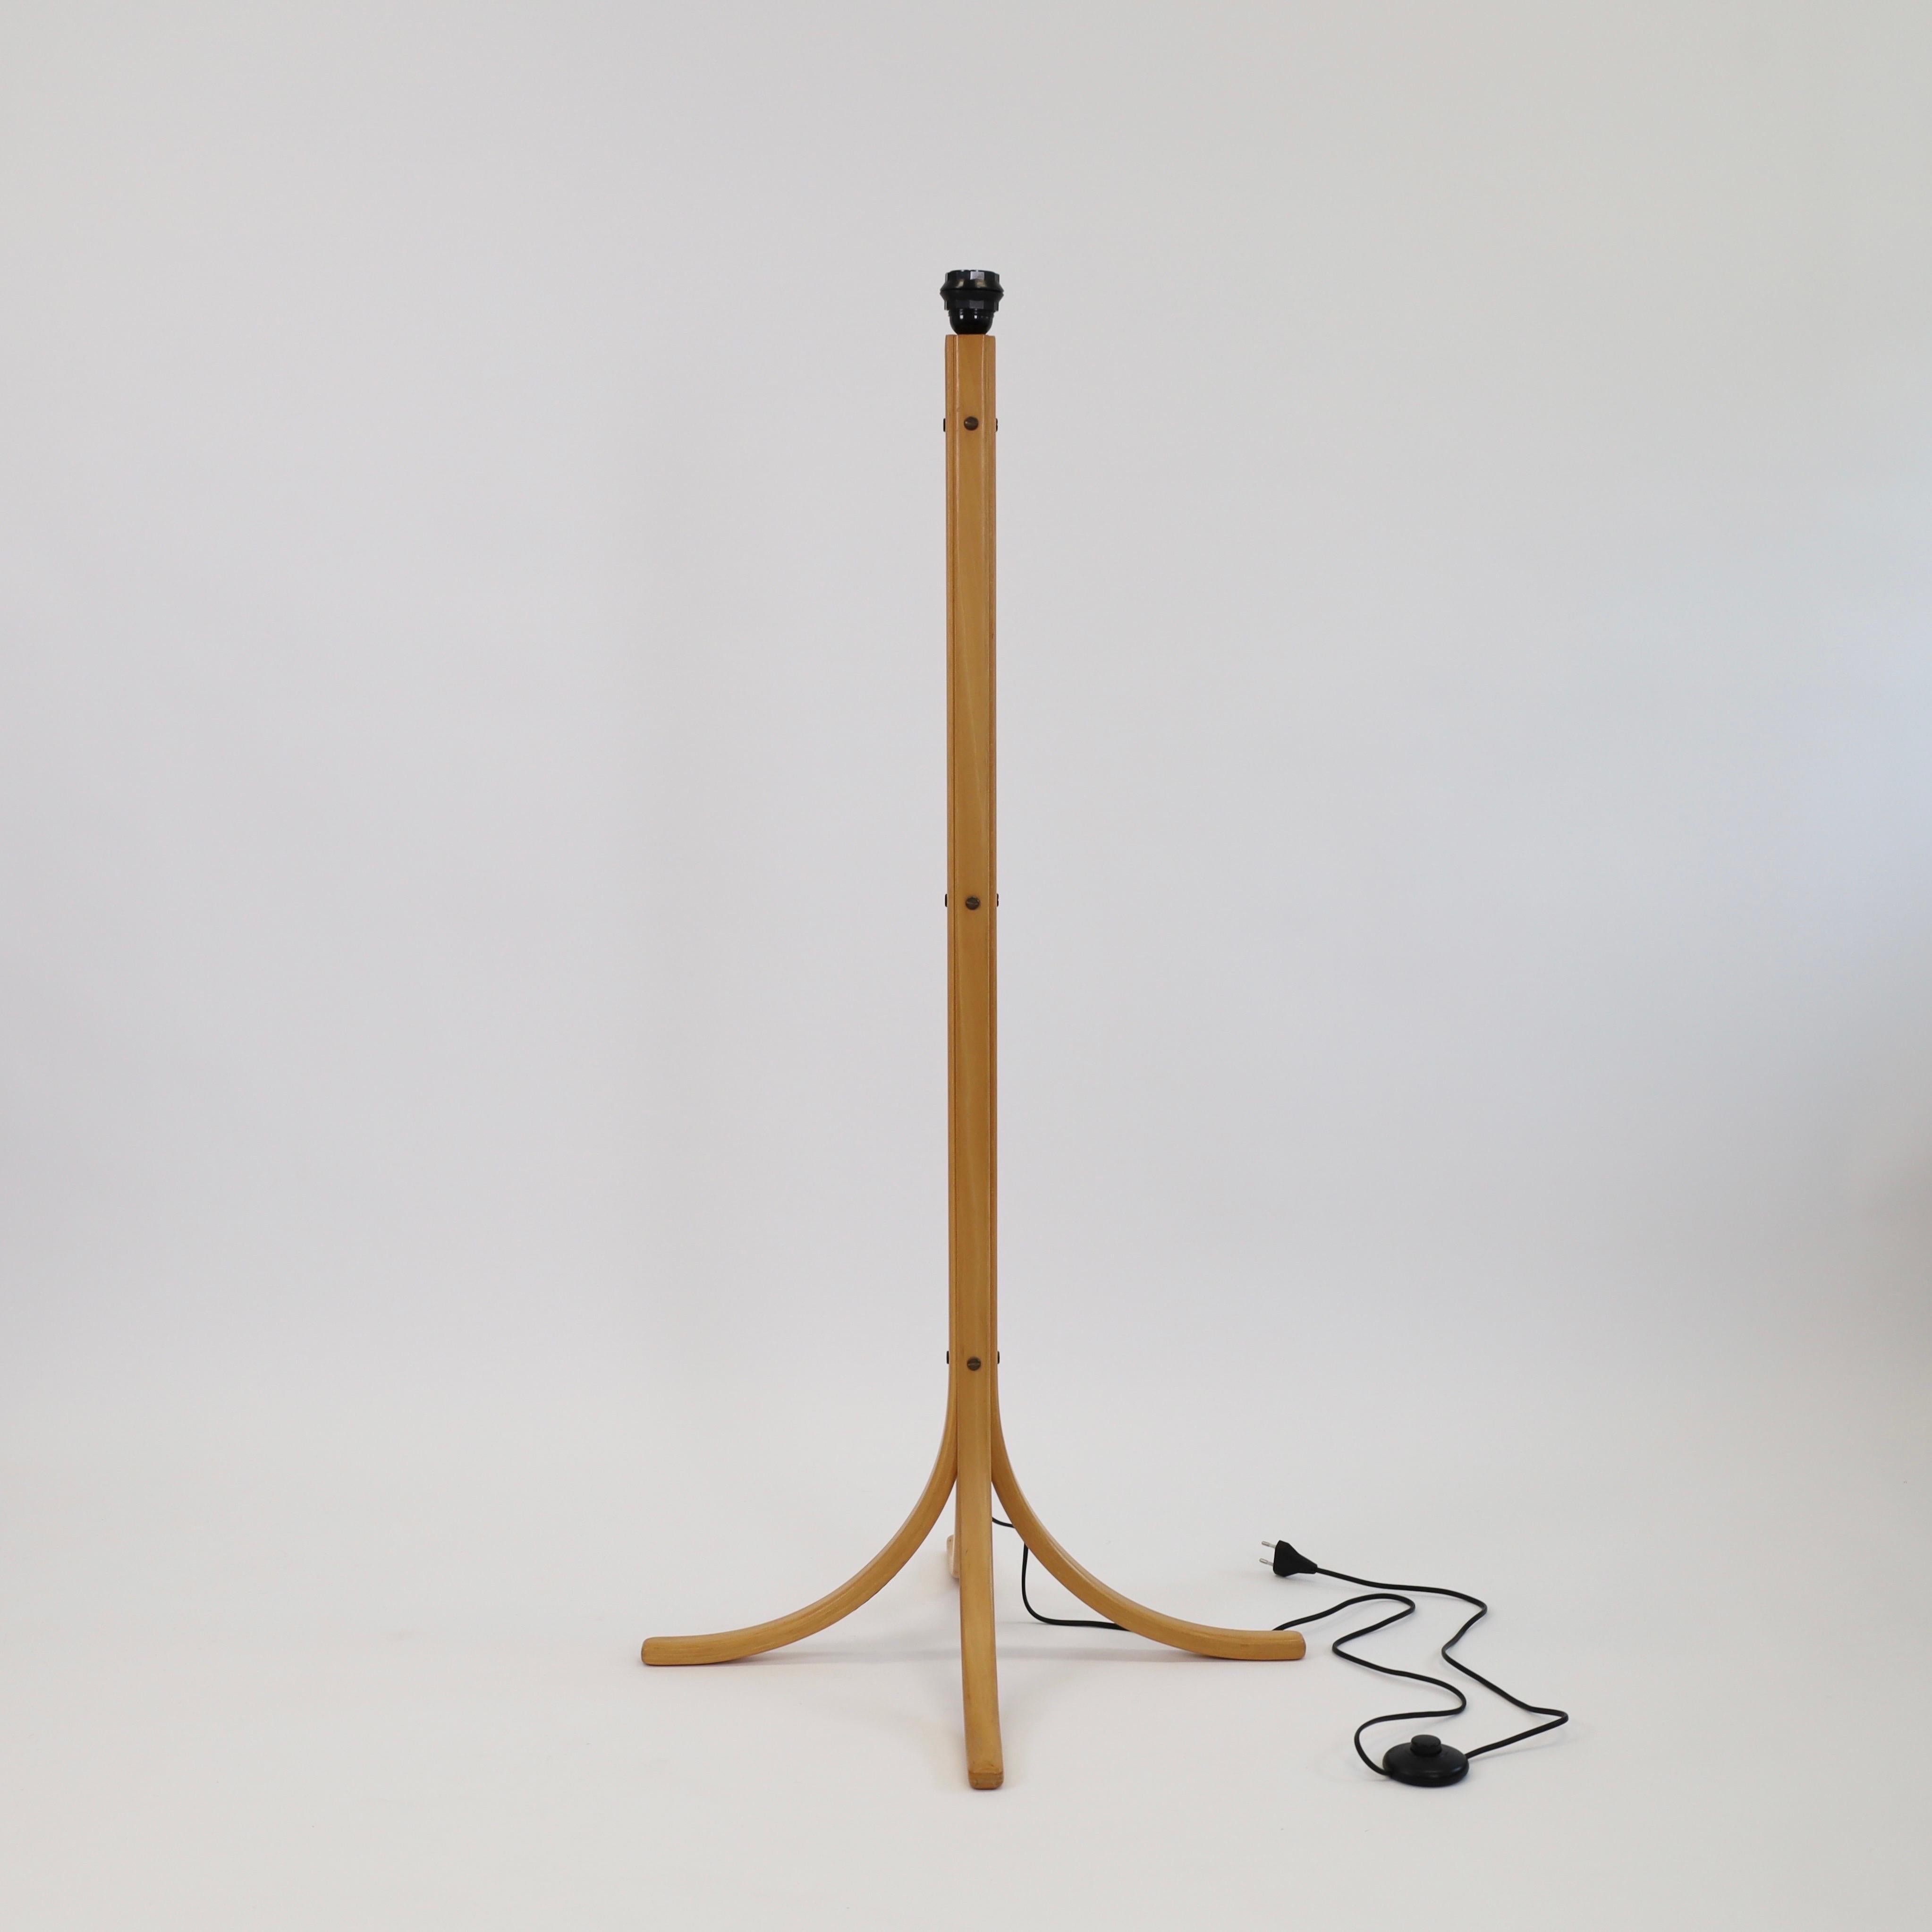 Late 20th Century Beech wood Floor Lamp by Anna Ehrner for Atelje Lyktan, 1970s, Sweden For Sale